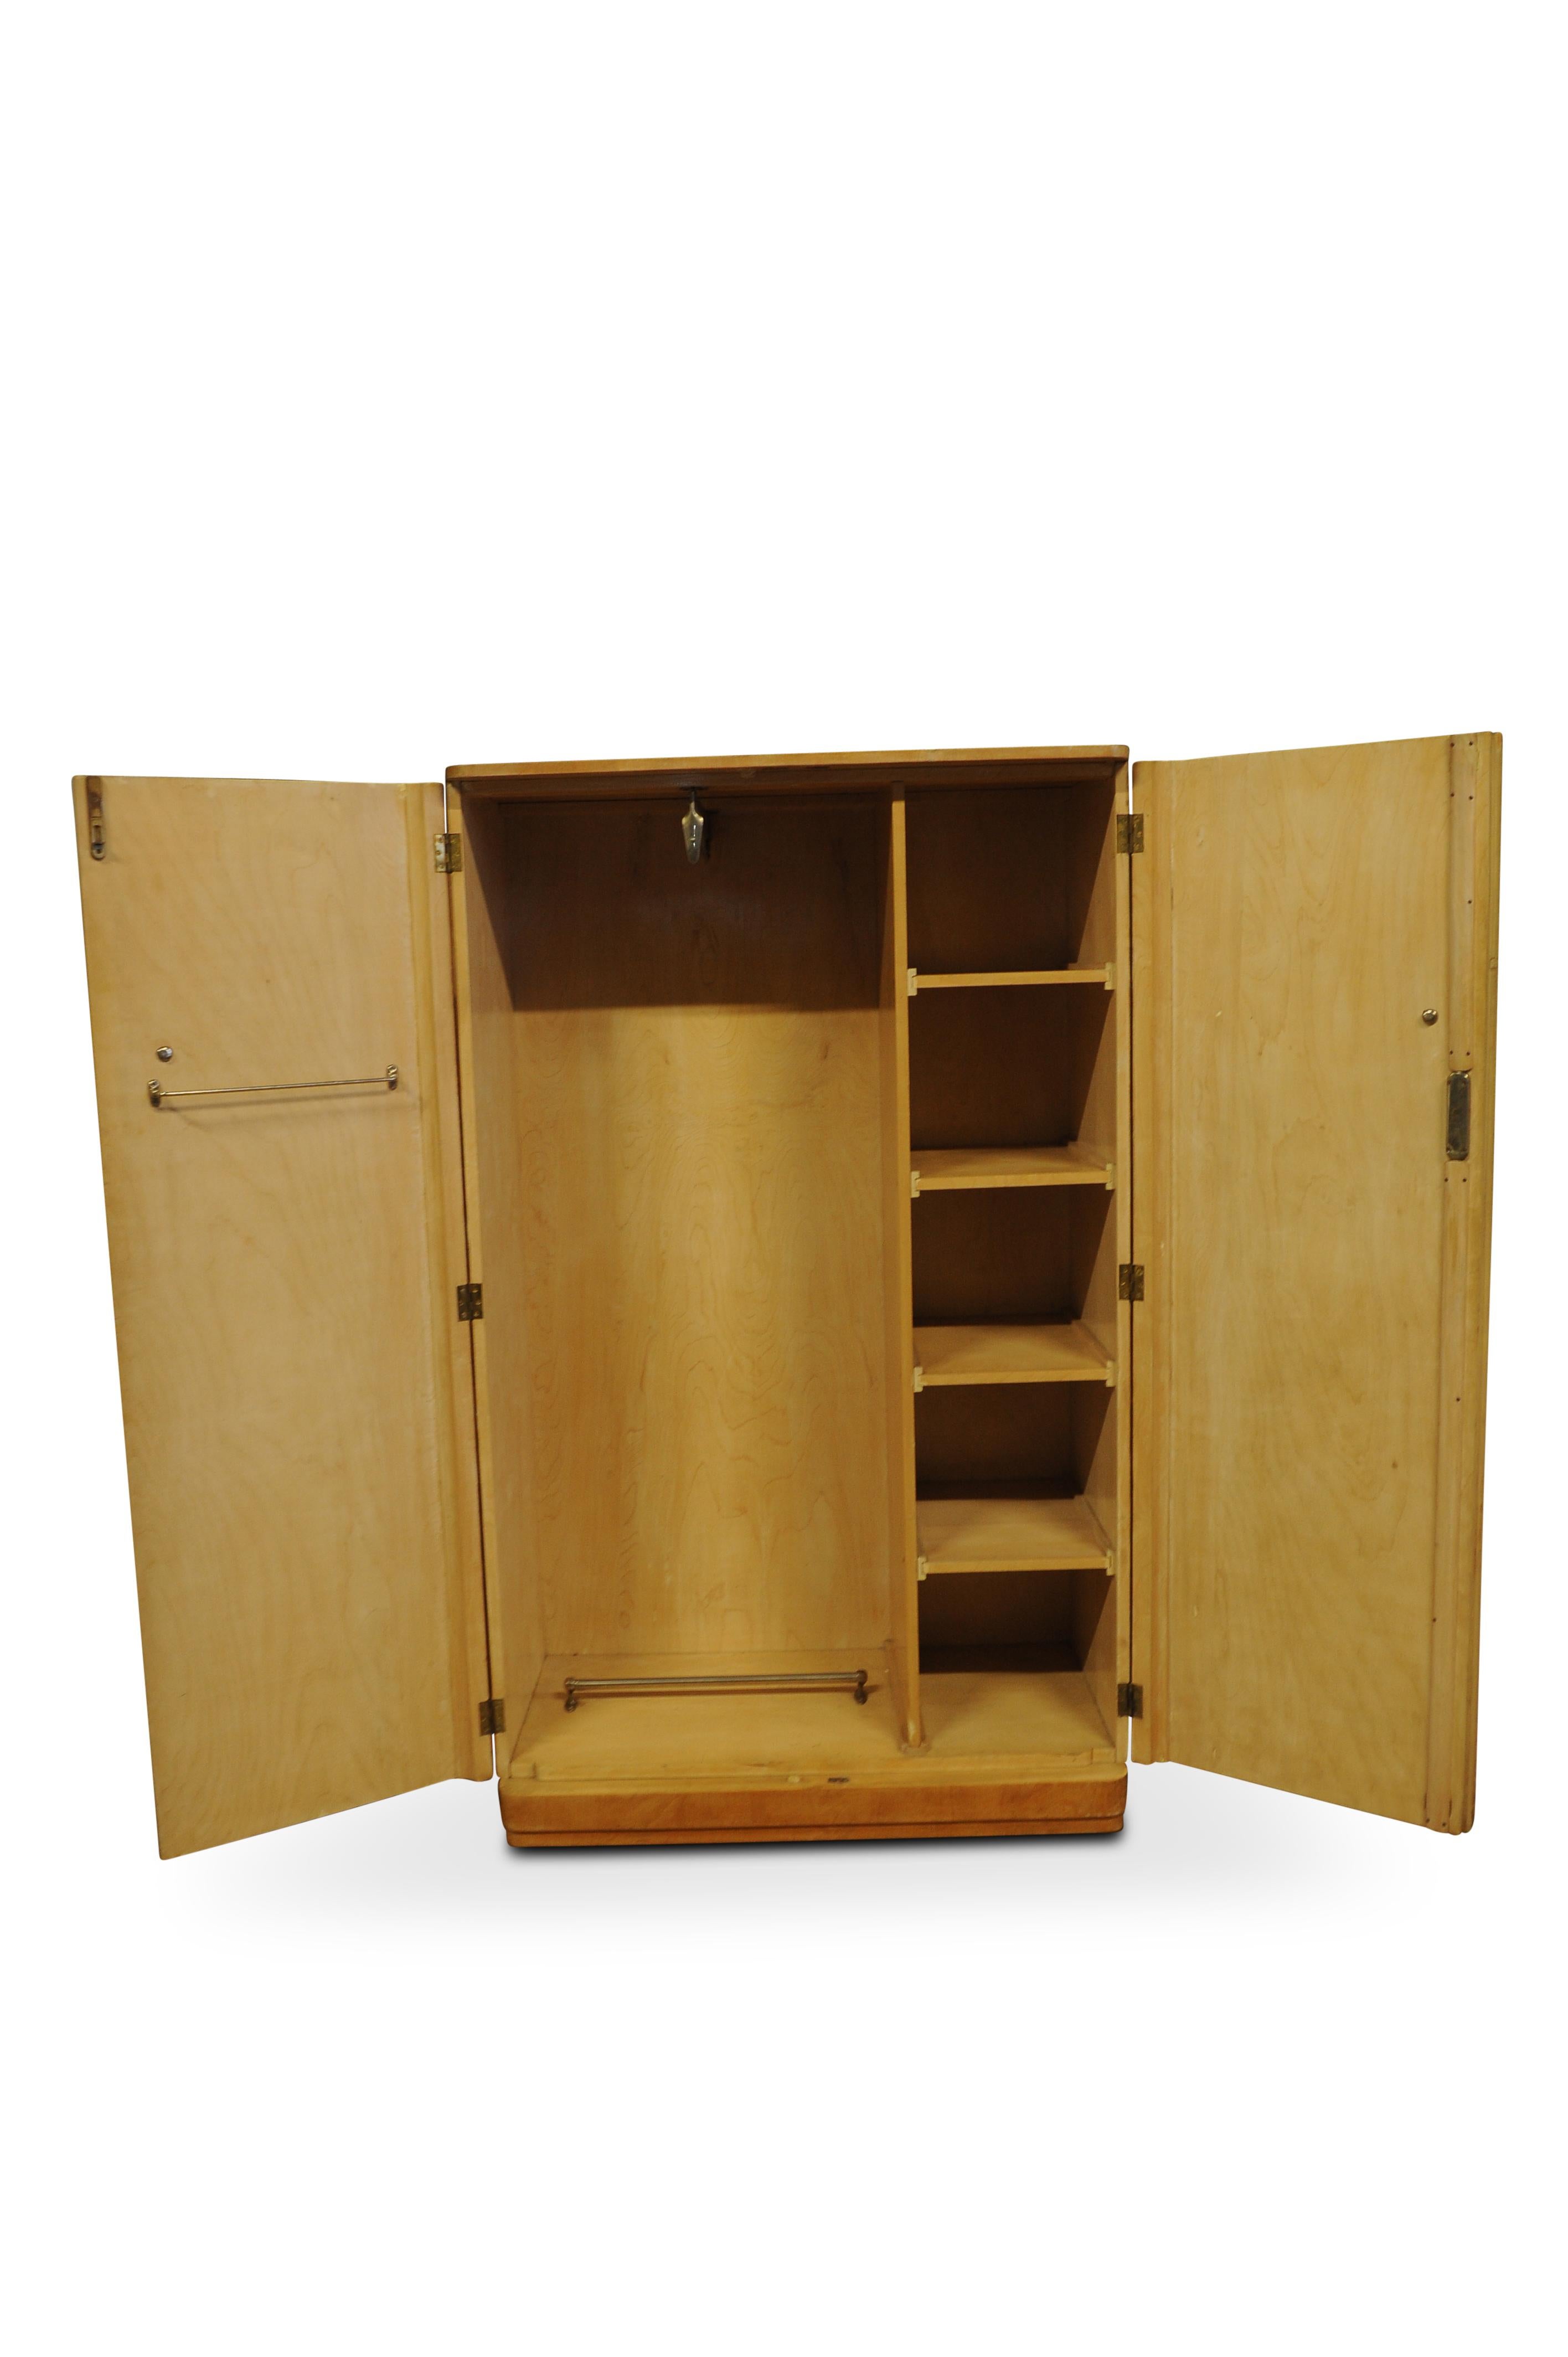 A 1930s Art Deco burr walnut figured two door wardrobe or armoire with original fittings.

A fine example of Art Deco 1920s-1930s furniture with the luxury interior all original fittings remain intact. Pull out bar for hanging clothes, separate